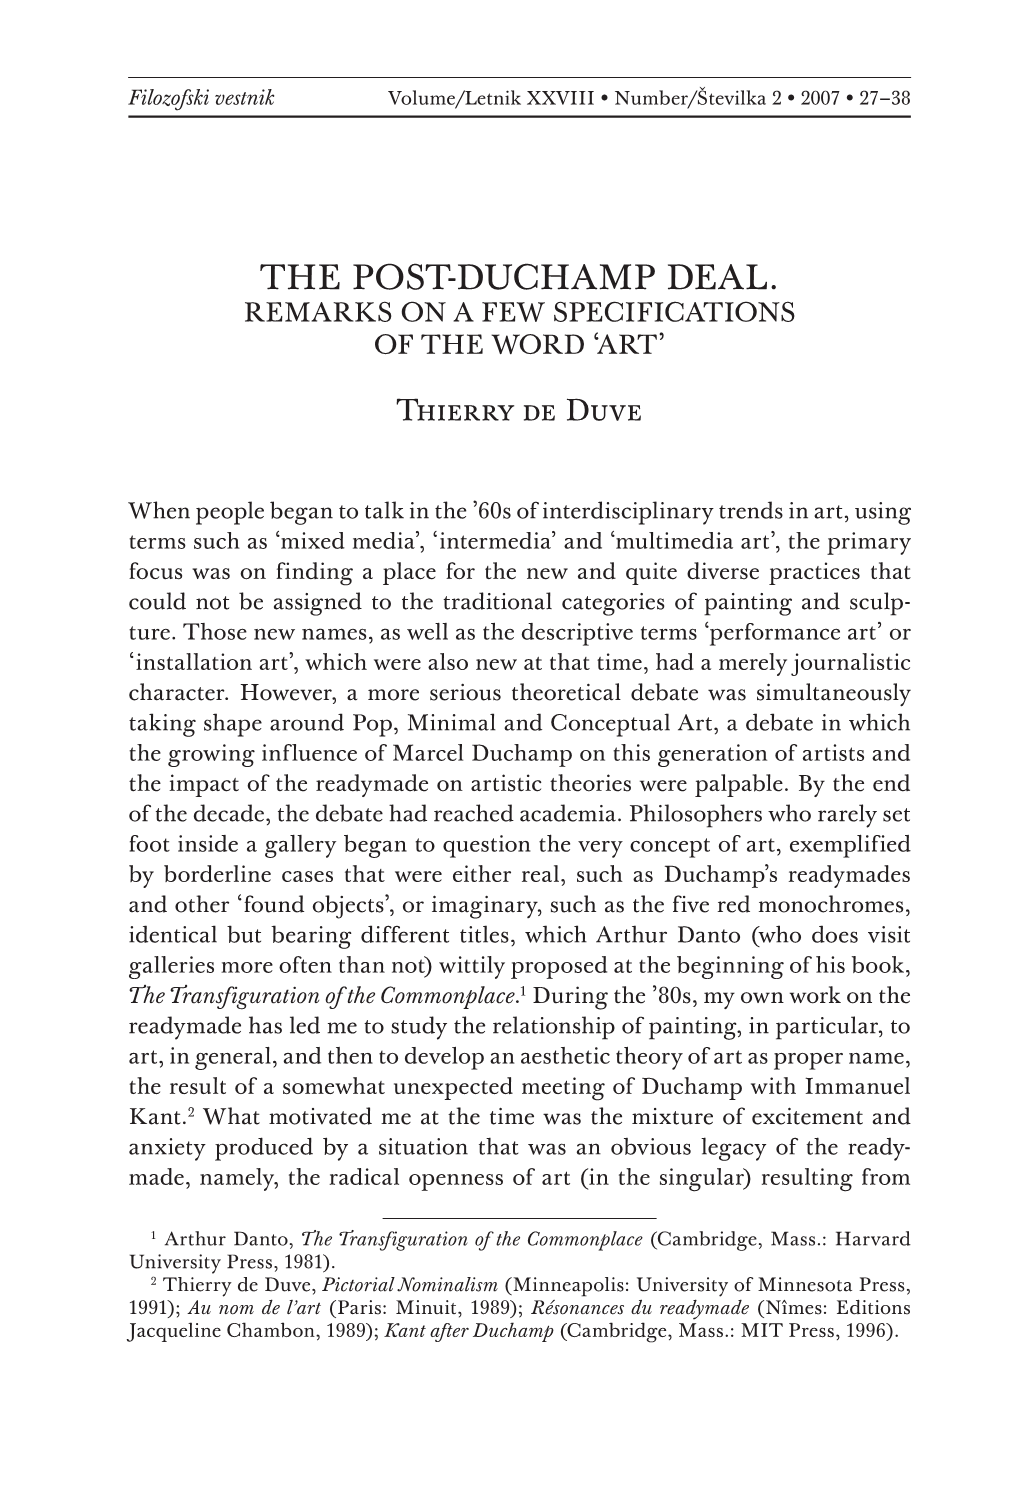 The Post-Duchamp Deal. Remarks on a Few Specifications of the Word ‘Art’